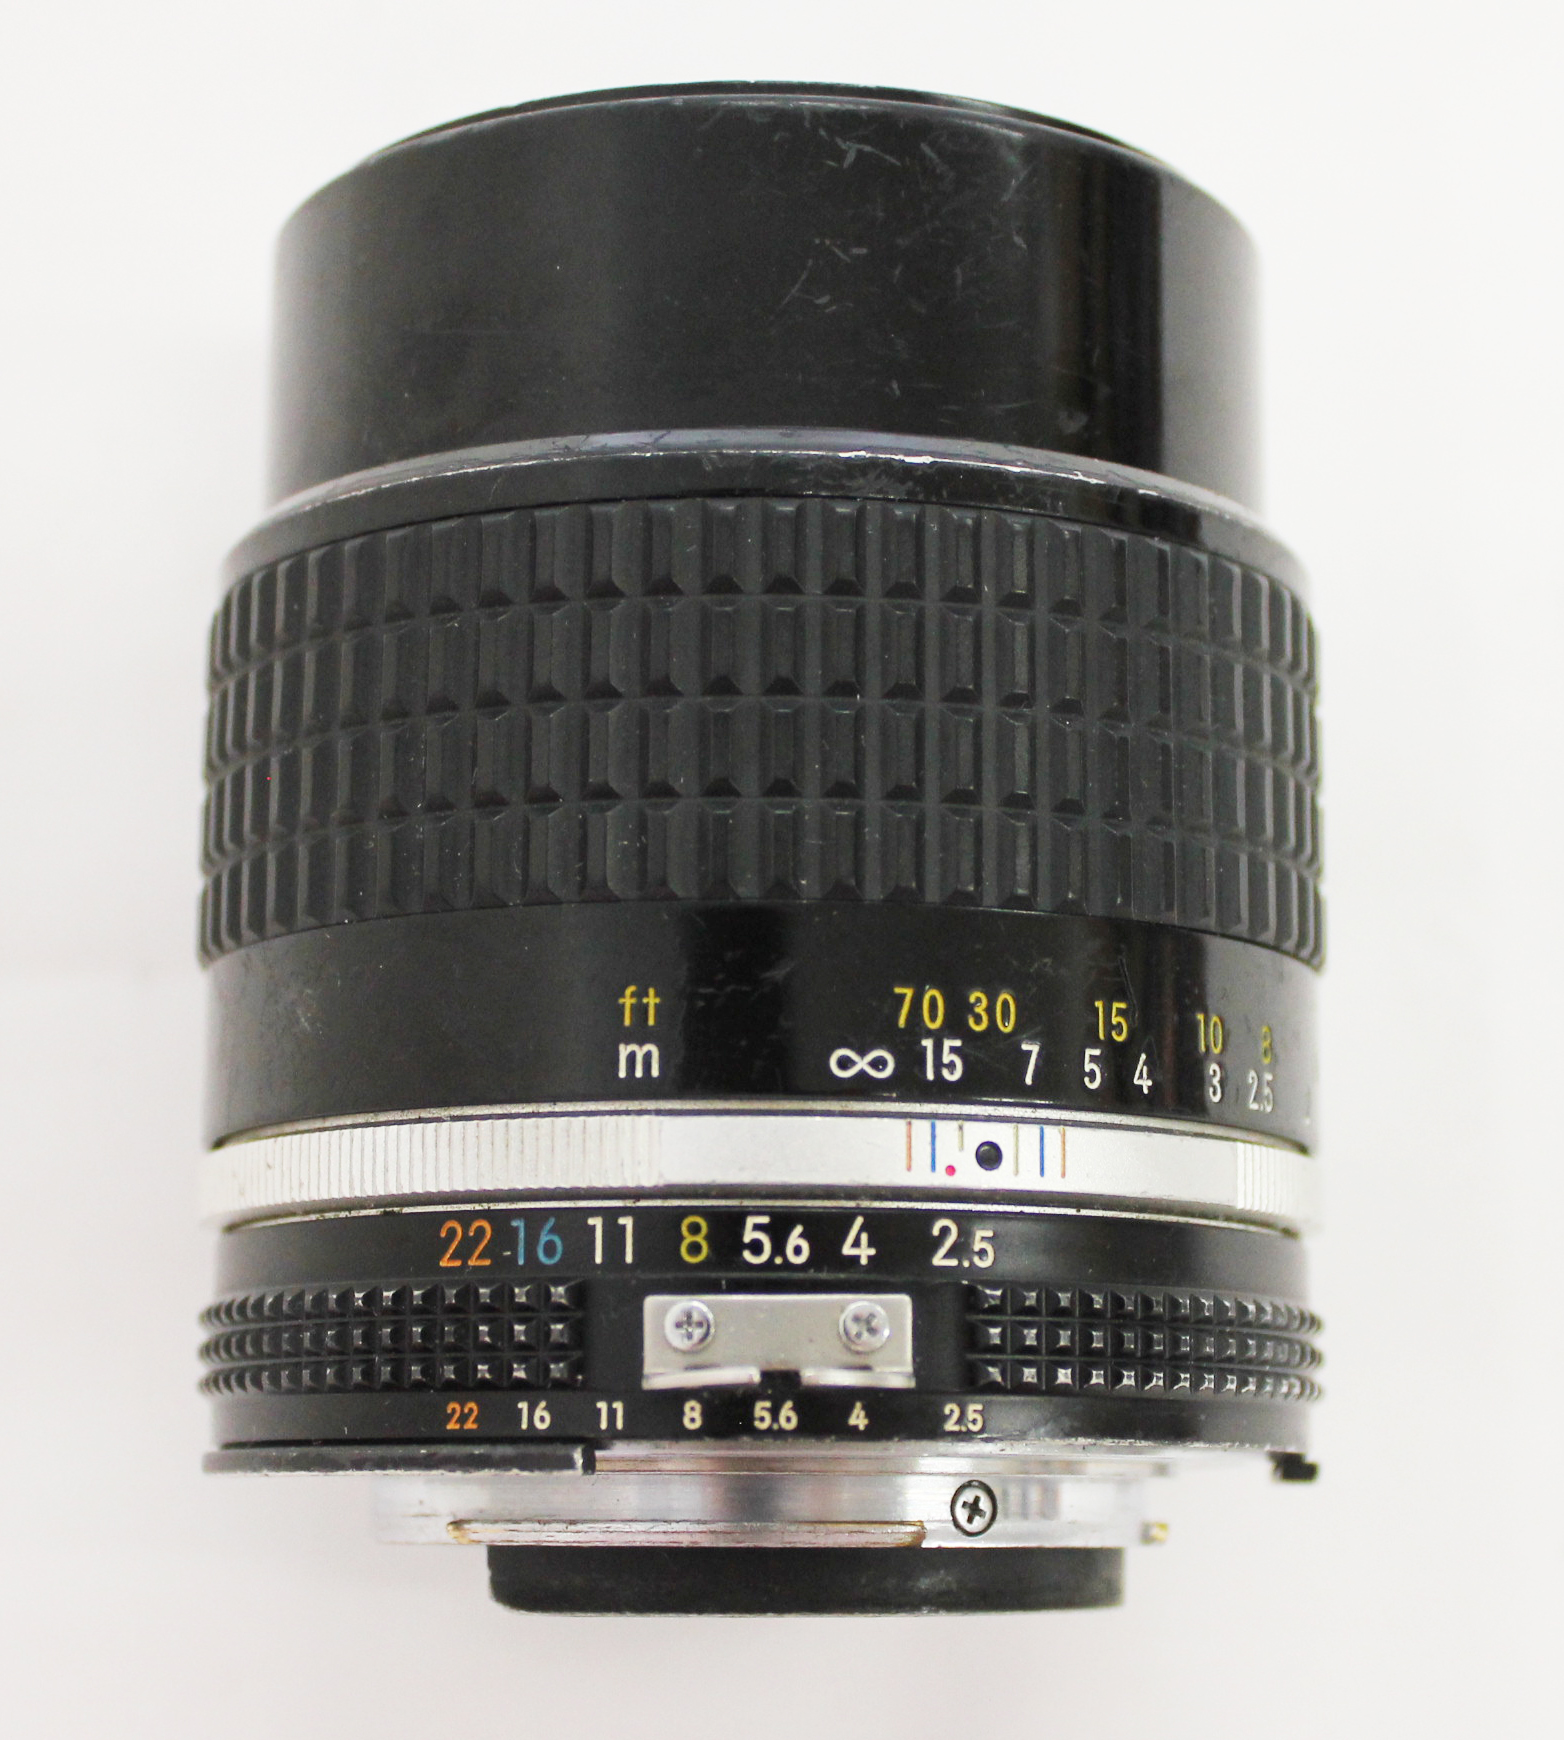  Nikon Nikkor Ai-s AIS 105mm F/2.5 Lens for F Mount SLR from Japan Photo 3